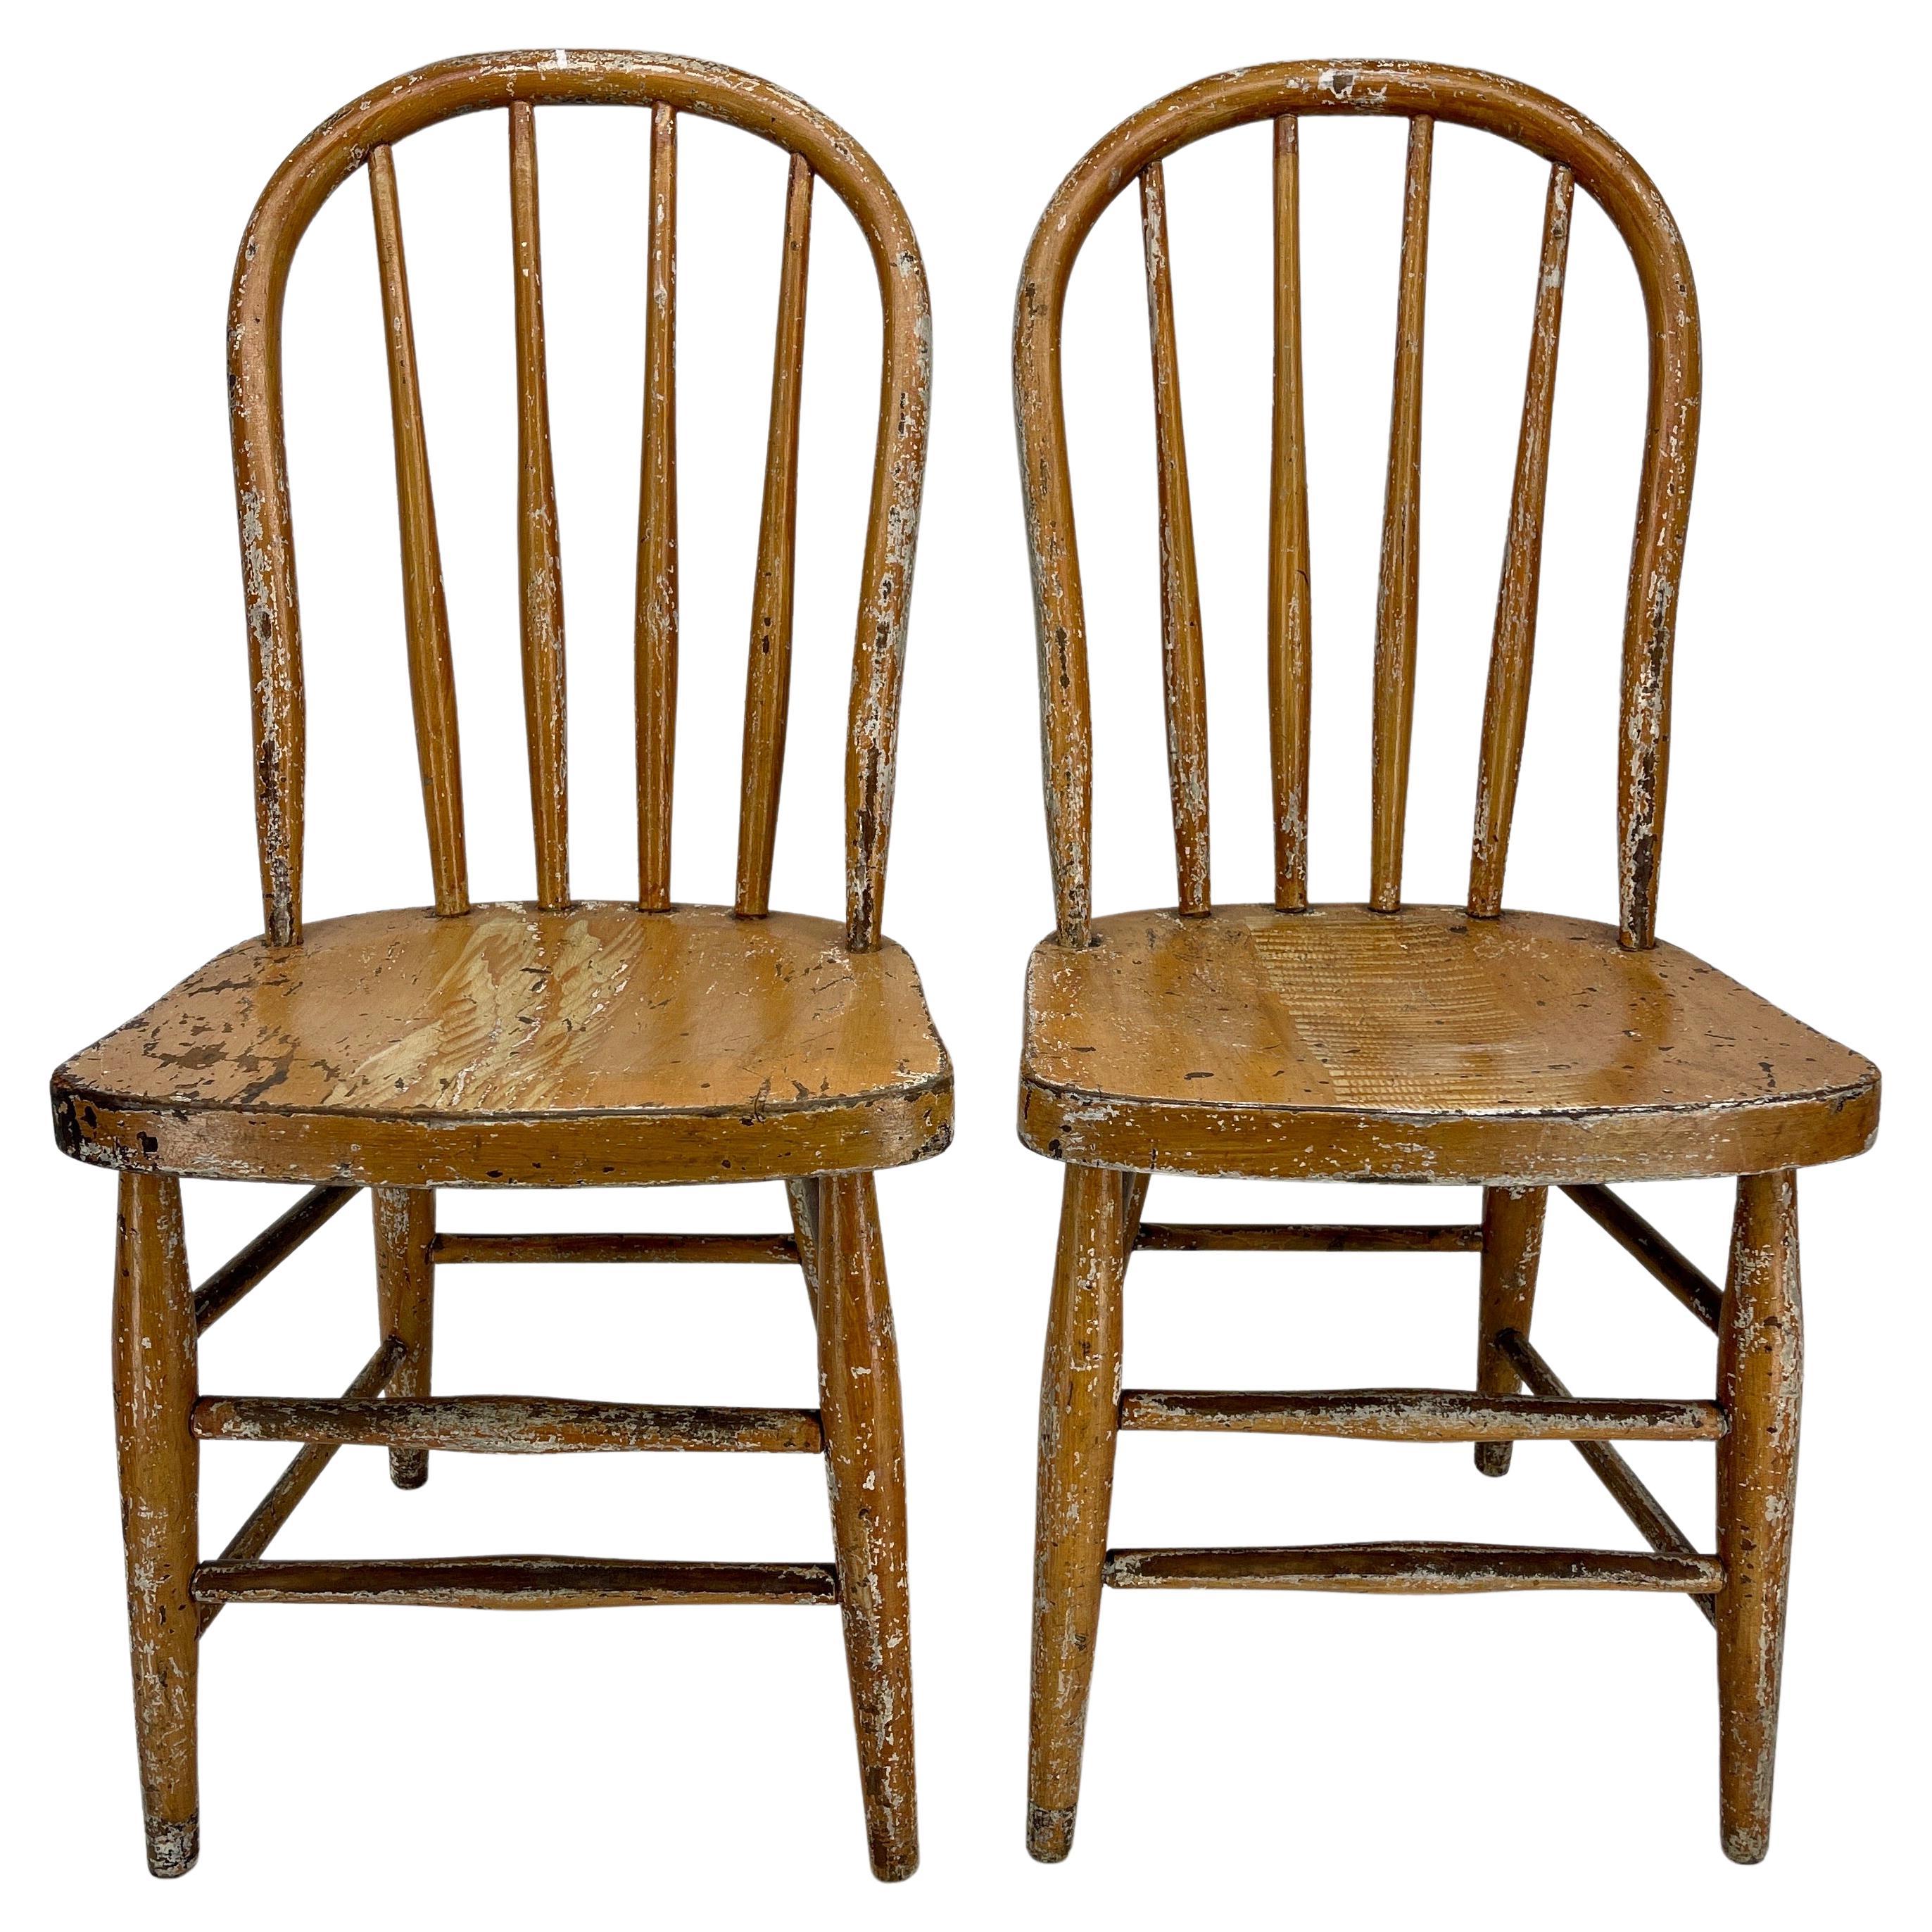 Pair of Small Early Painted Folk Art Chairs or Side Tables For Sale